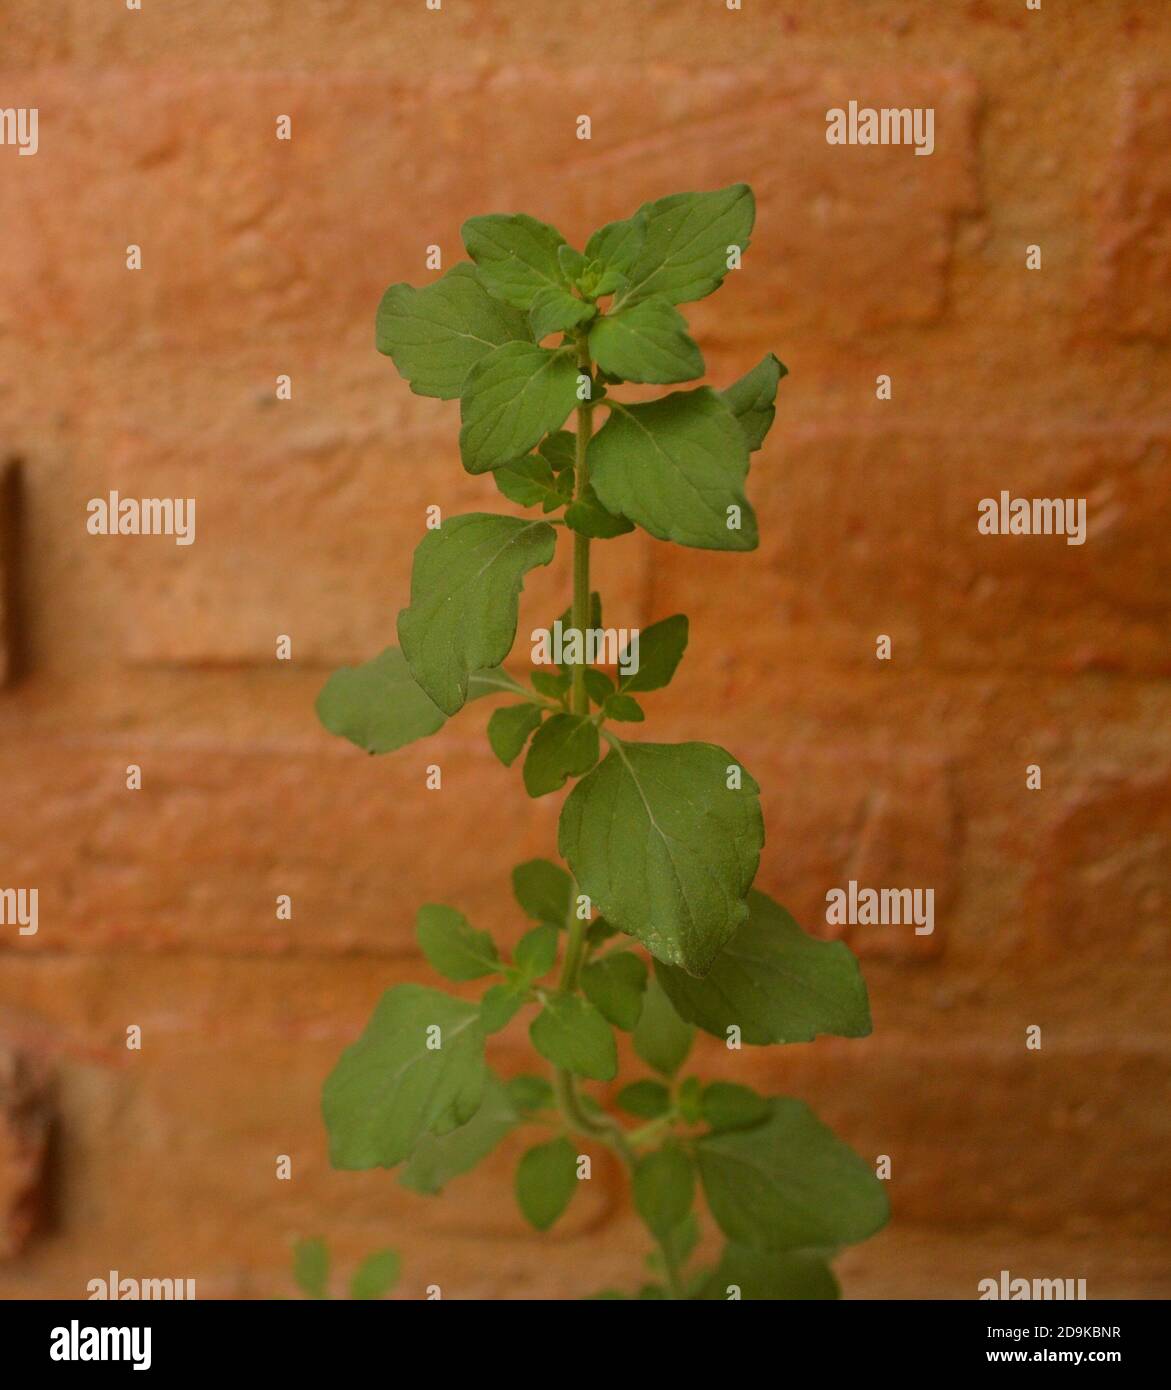 Exotic peppermint plant Calamintha nepeta (L.) against brick wall Stock Photo